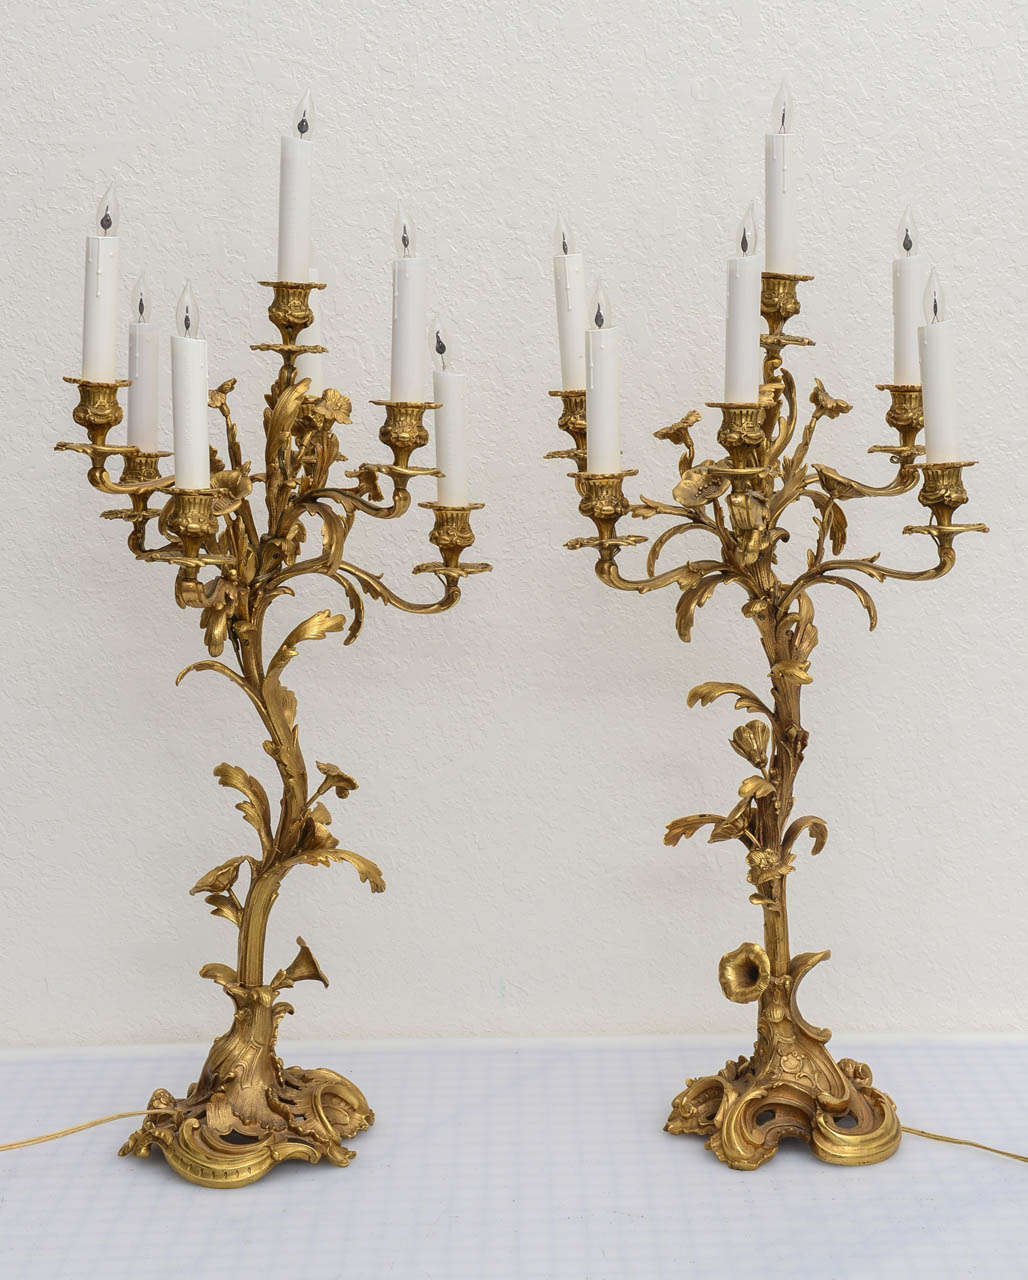 Pair of French candelabras with very detailed composition.  Each has six radiating candle arms with wax sleeves, currently wired but could be removed & used with candles.